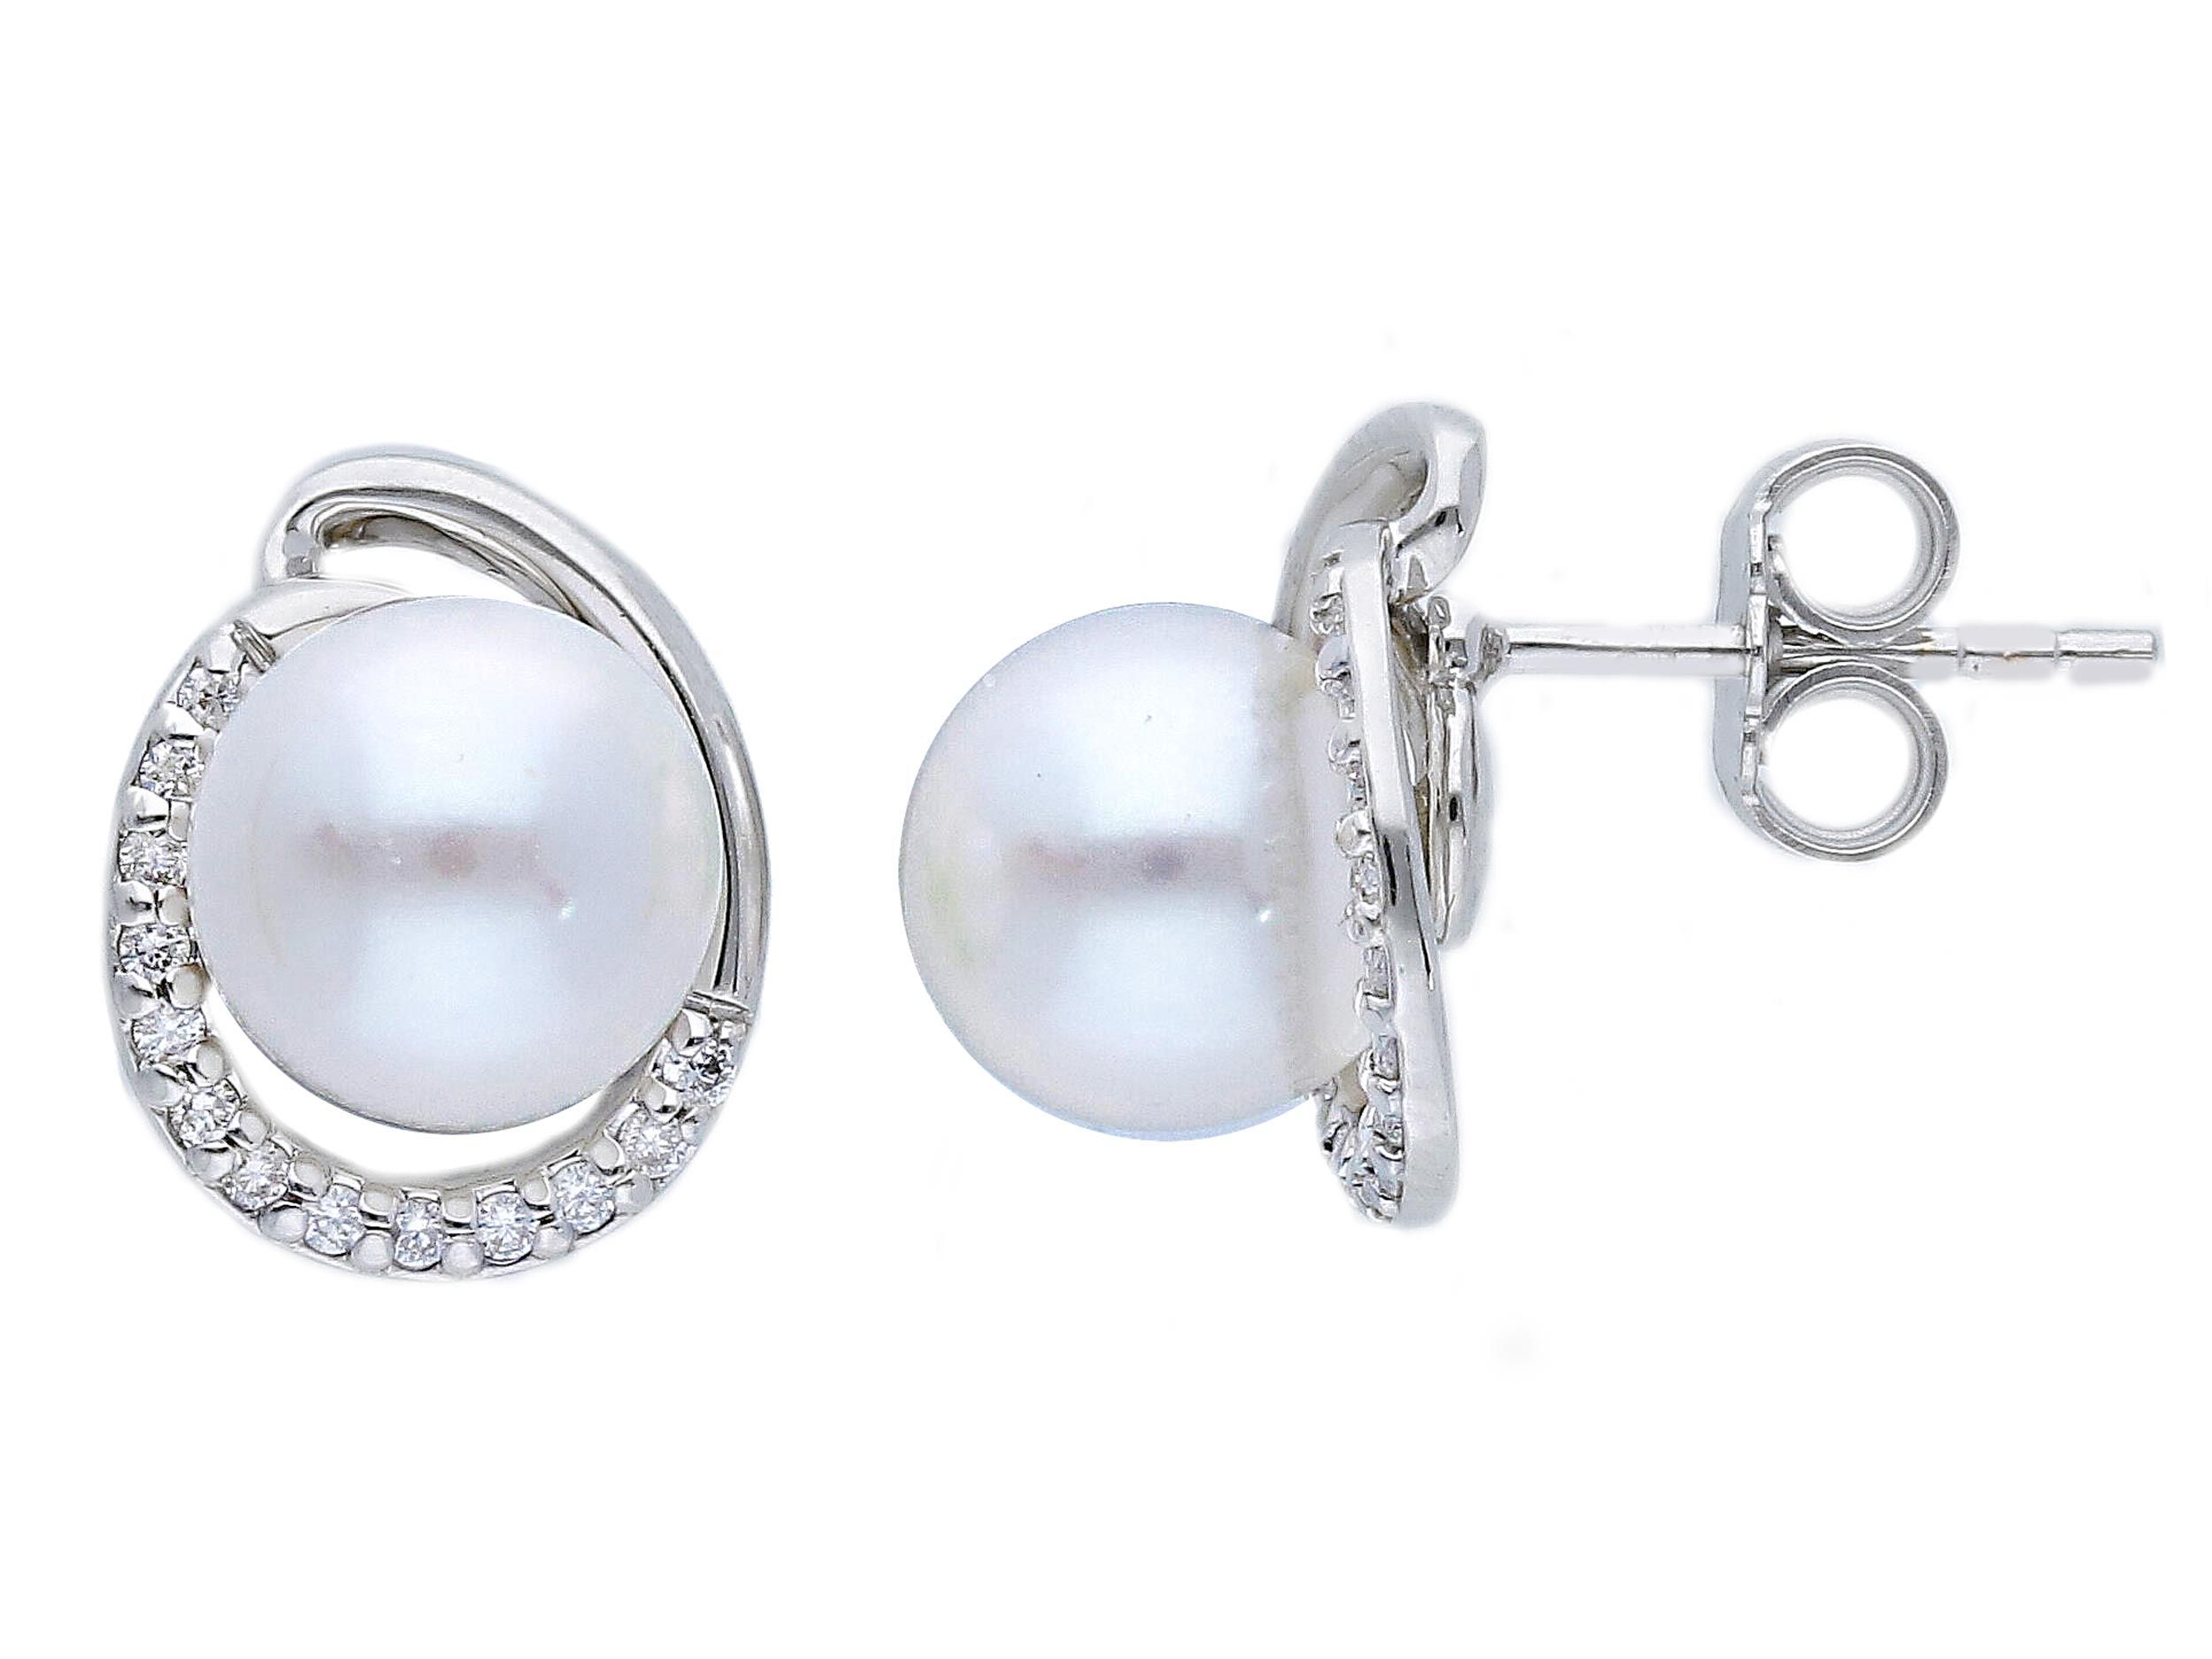  White gold earrings k18 with diamonds αnd pearl (code S253228)